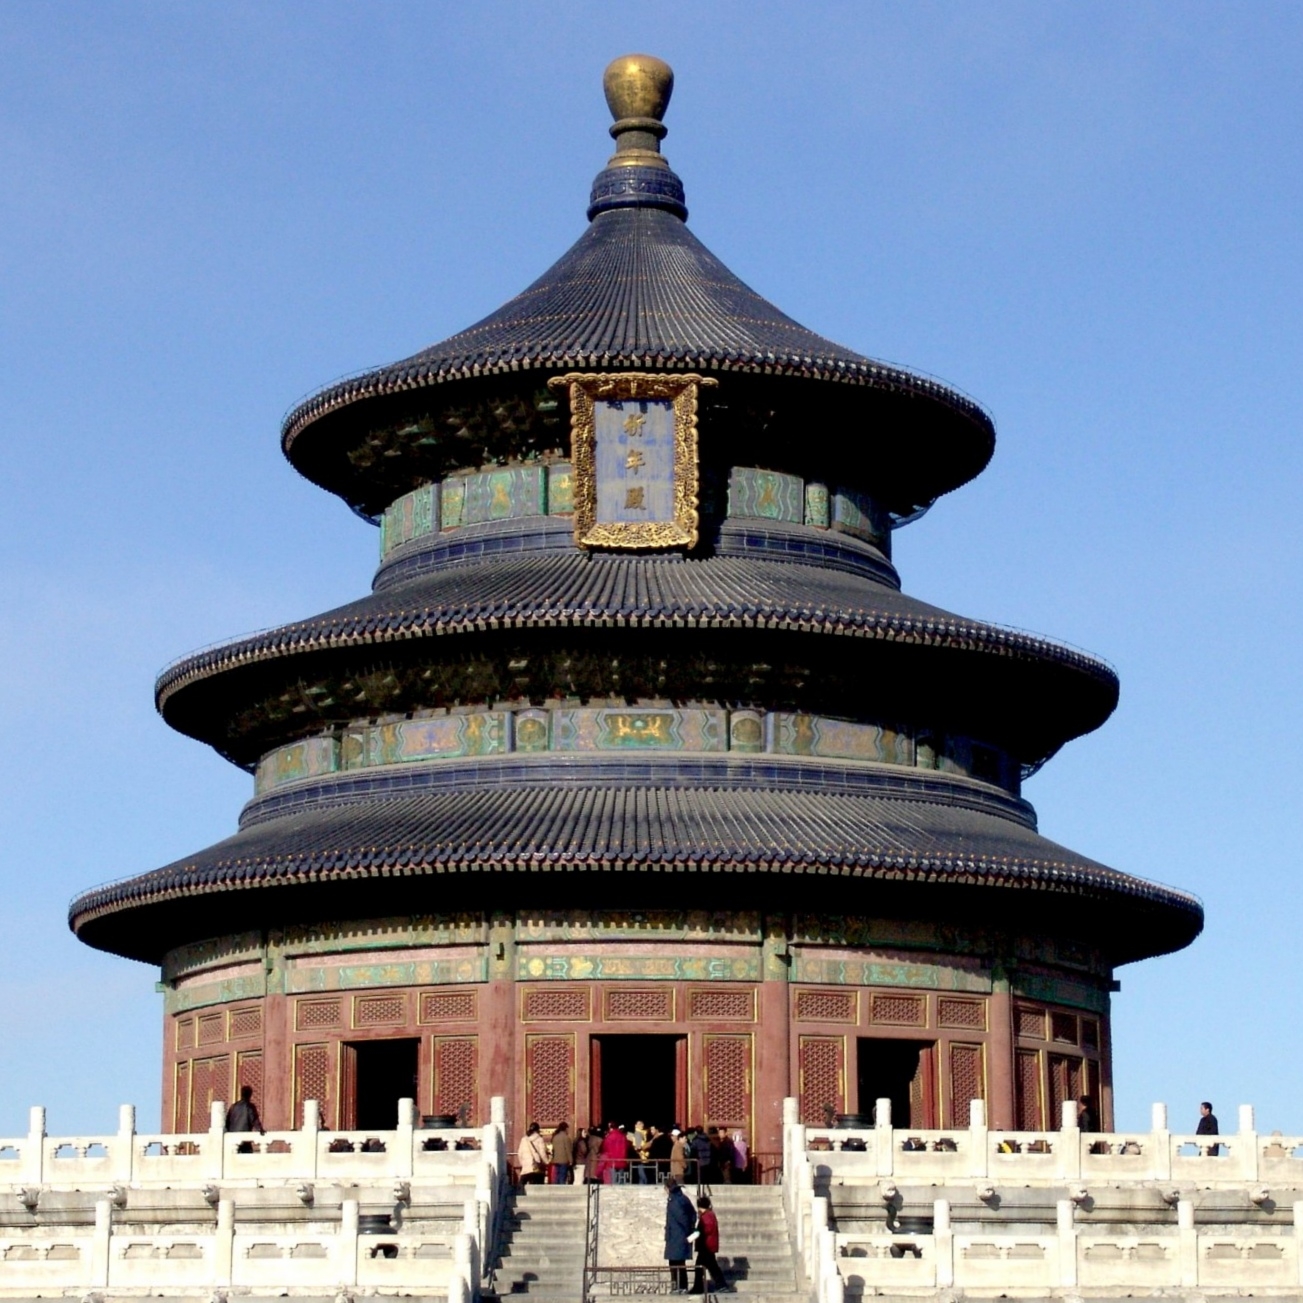 The Hall of Prayer for Good Harvest, Temple of Heaven, Beijng.